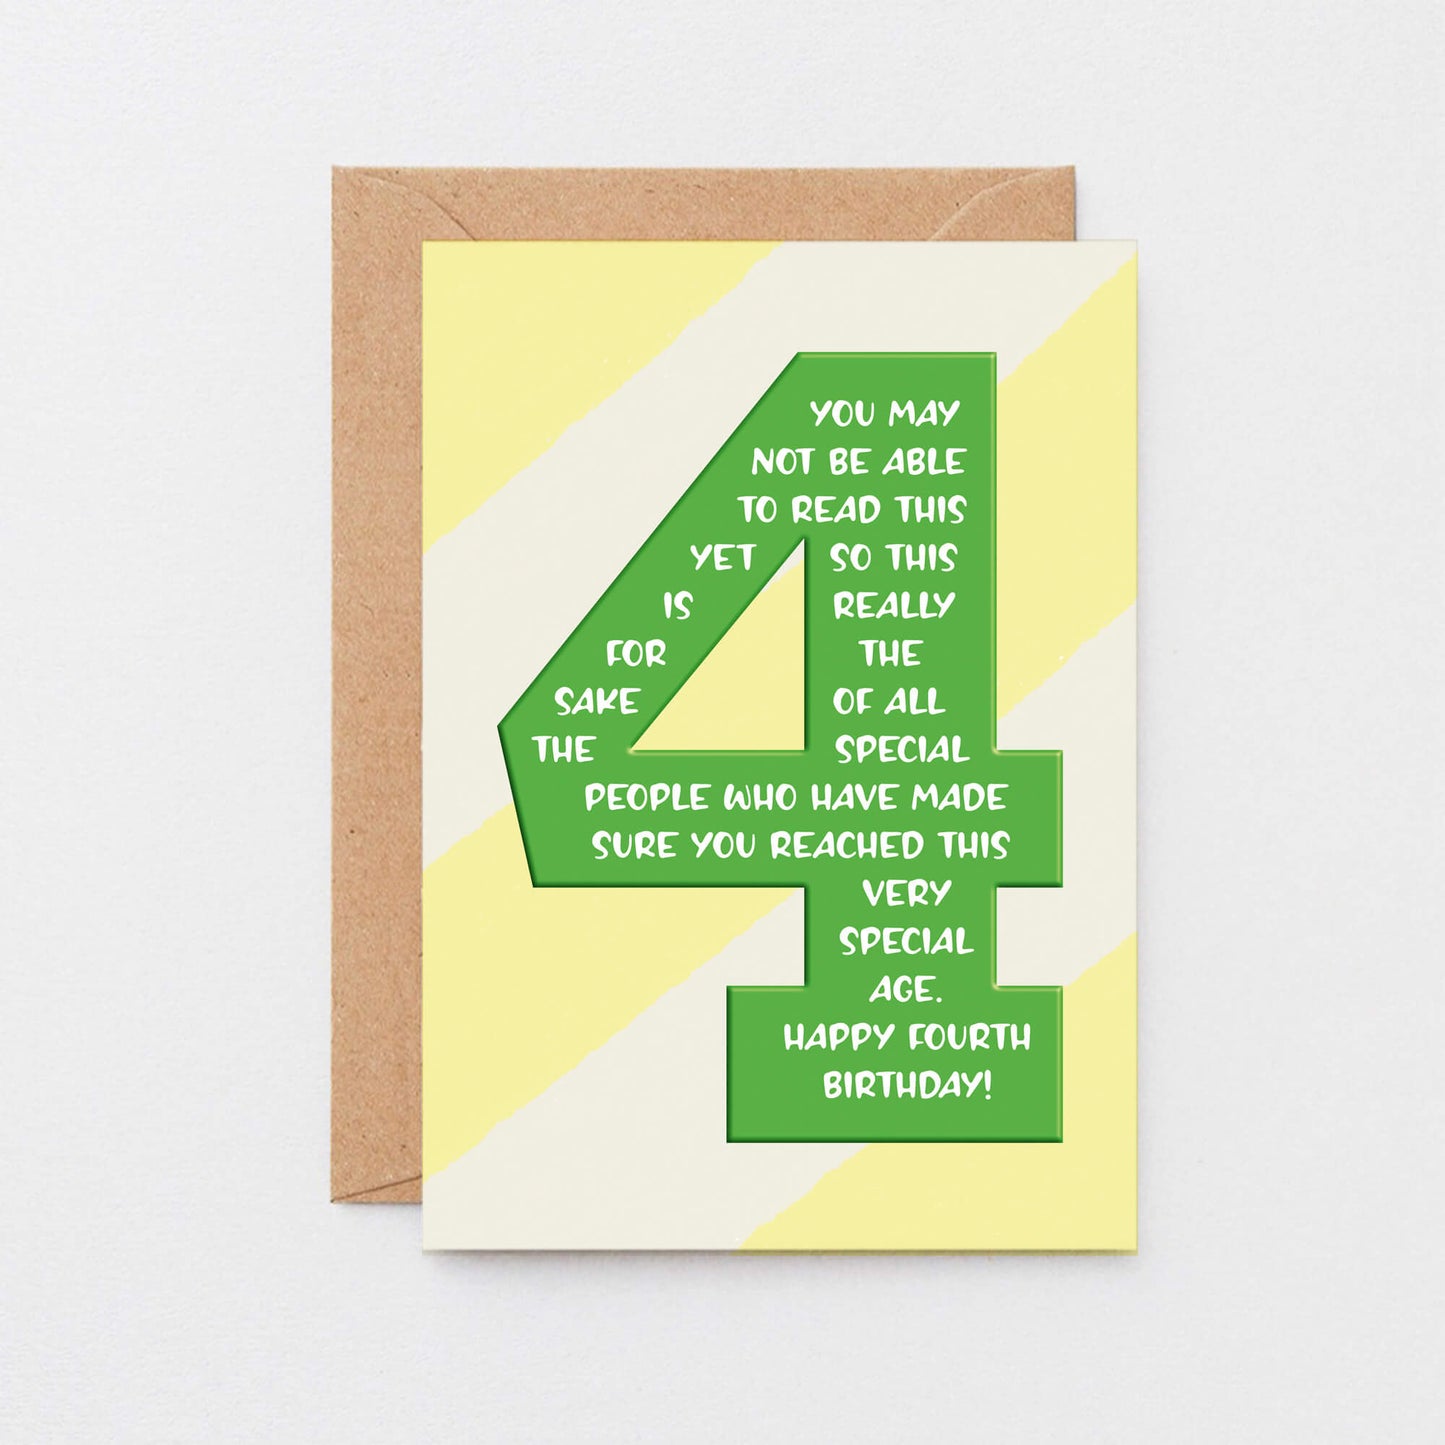 4th Birthday Card by SixElevenCreations. You may not be able to read this yet so this is really for the sake of all the special people who have made sure you reached this very special age. Happy Fourth Birthday! Product Code SE6004A6